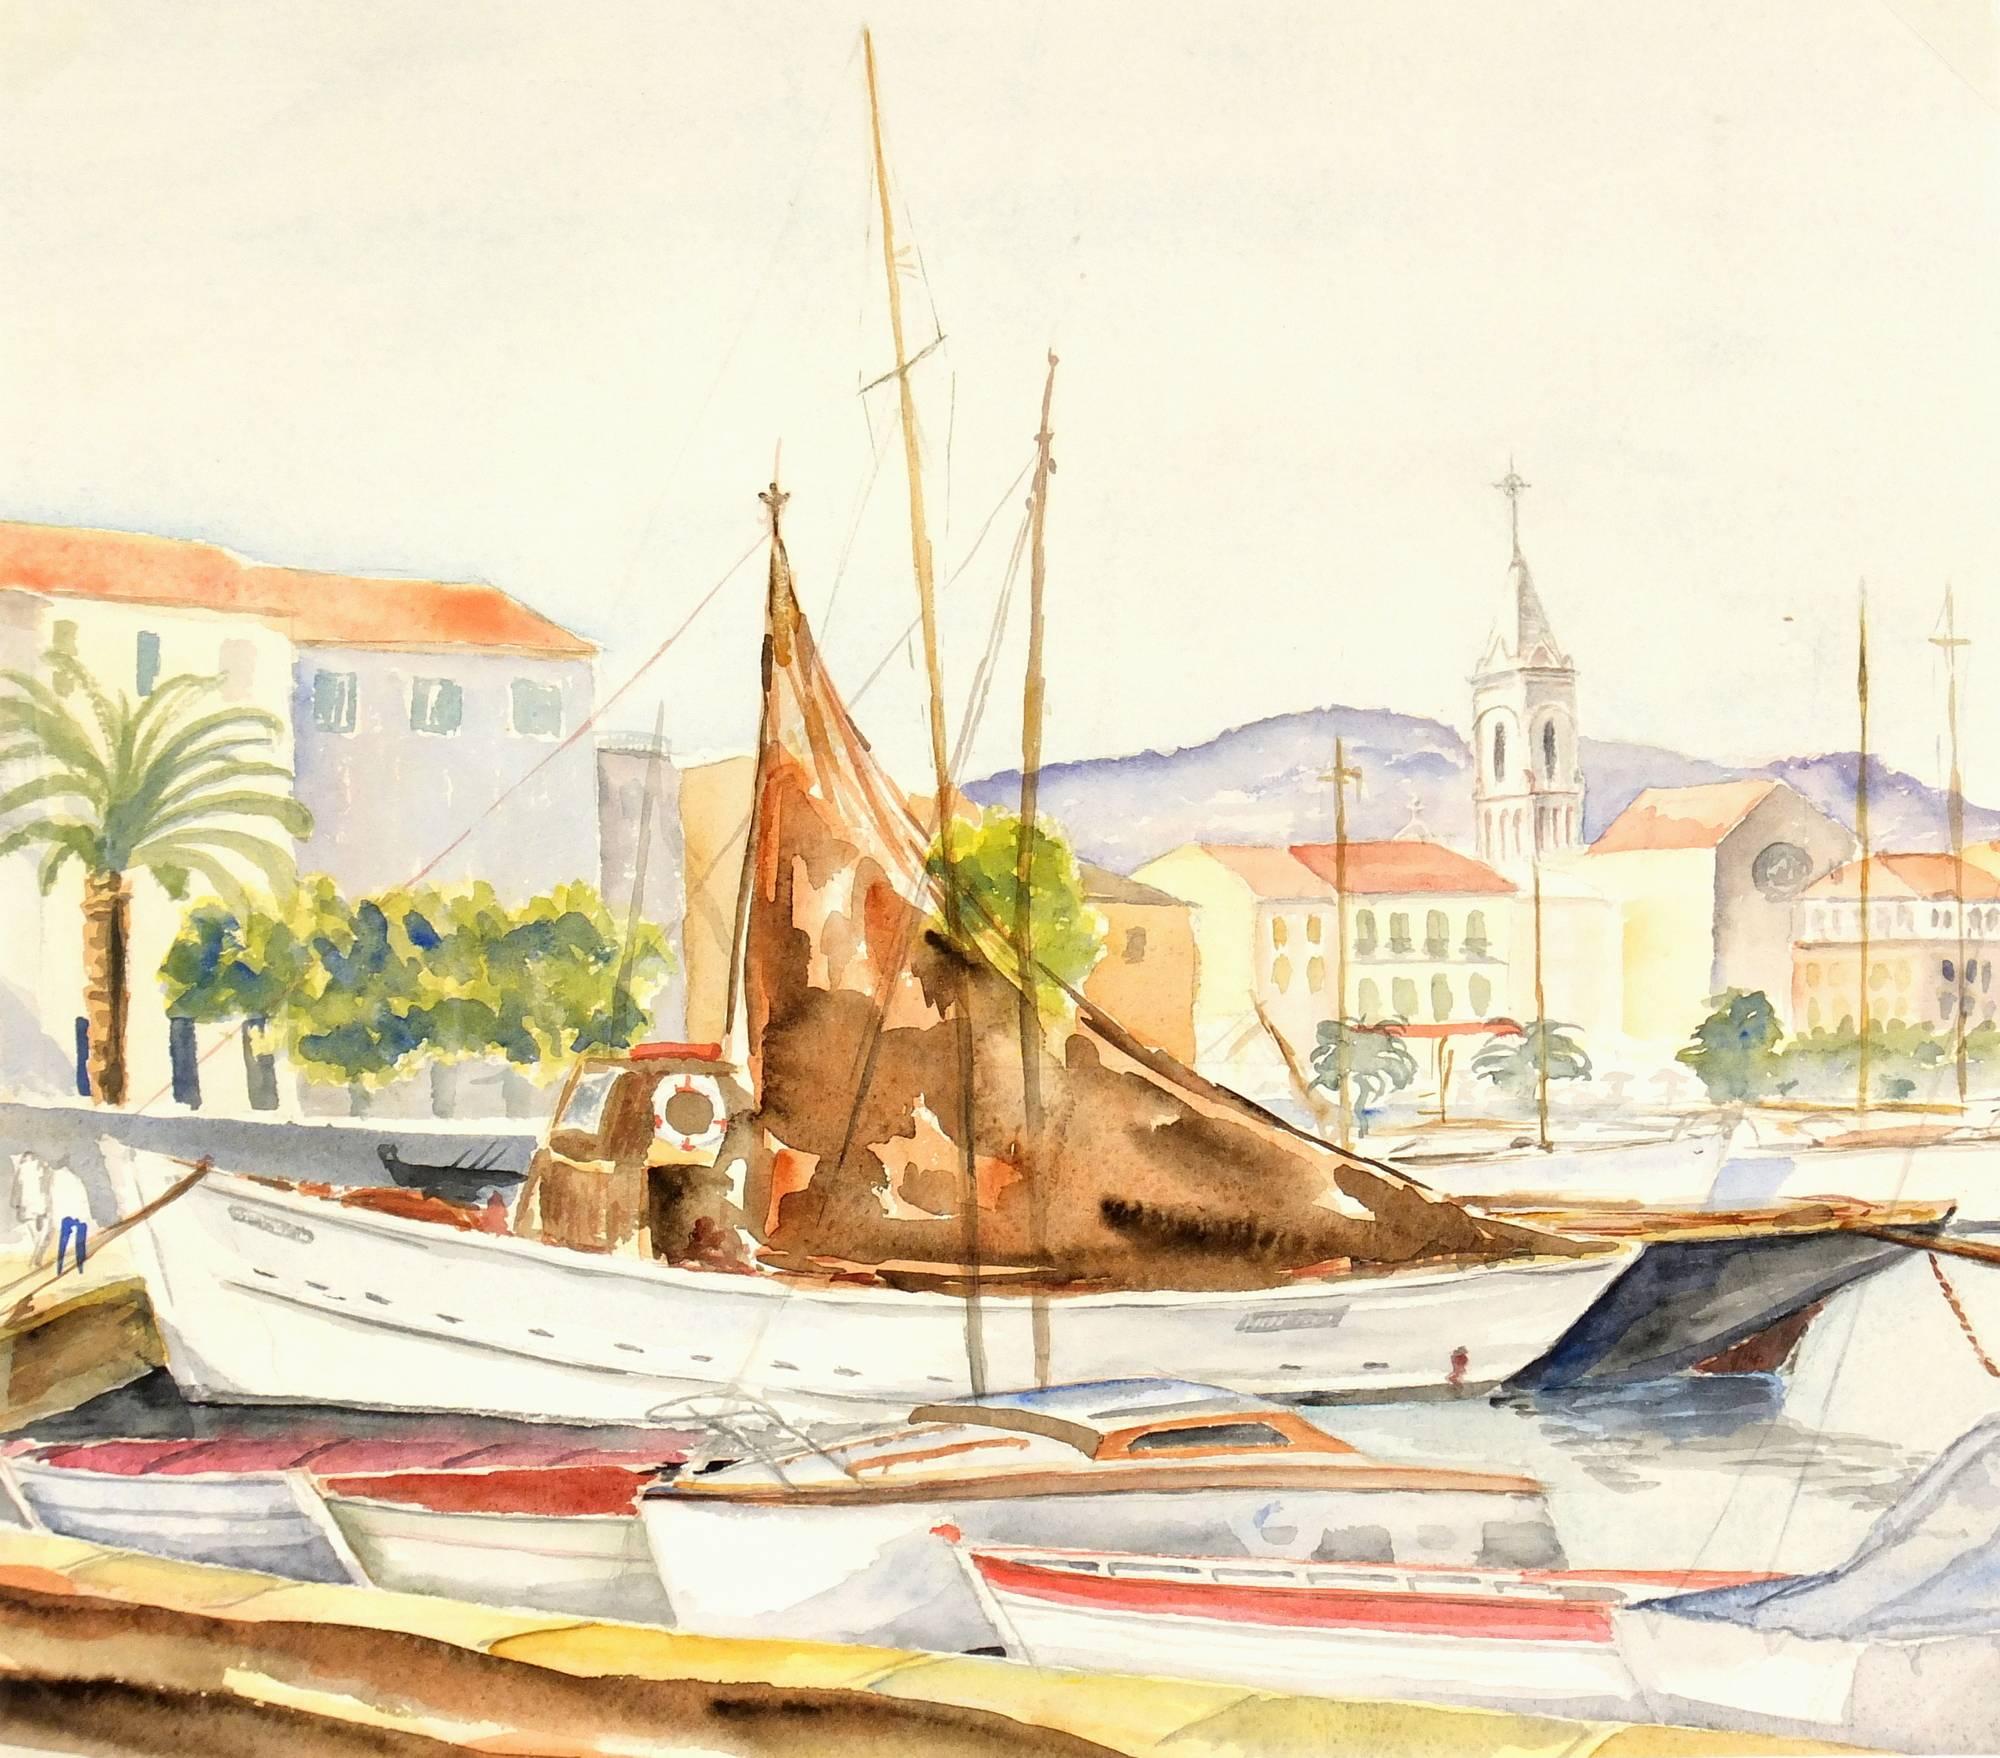 Unknown Landscape Art - French Watercolor Harbor Landscape - Mediterranean Wharf with Sailboats